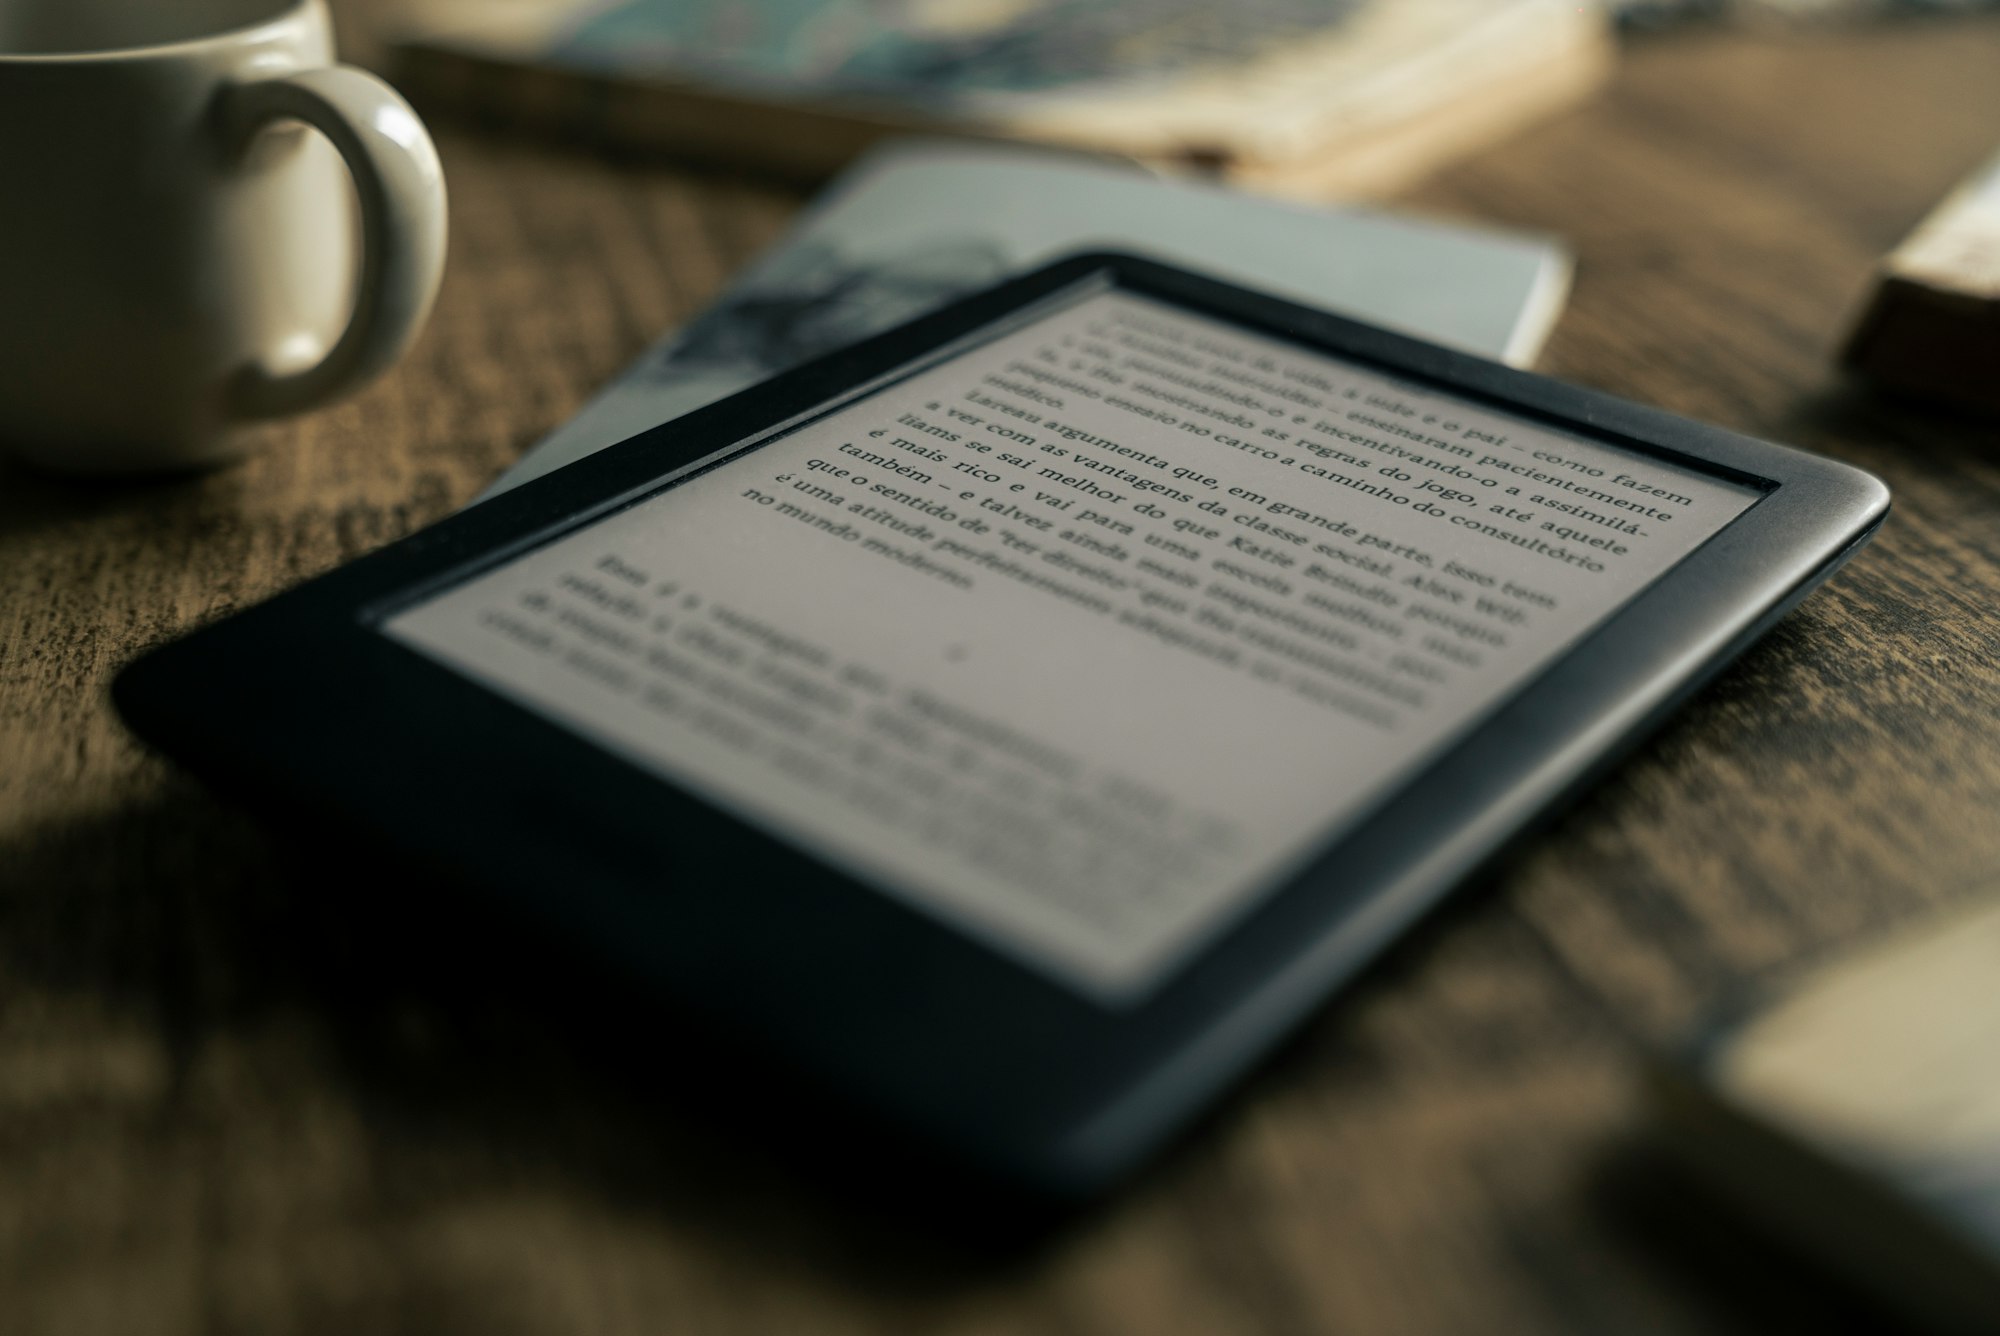 a kindle ereader on a coffee table